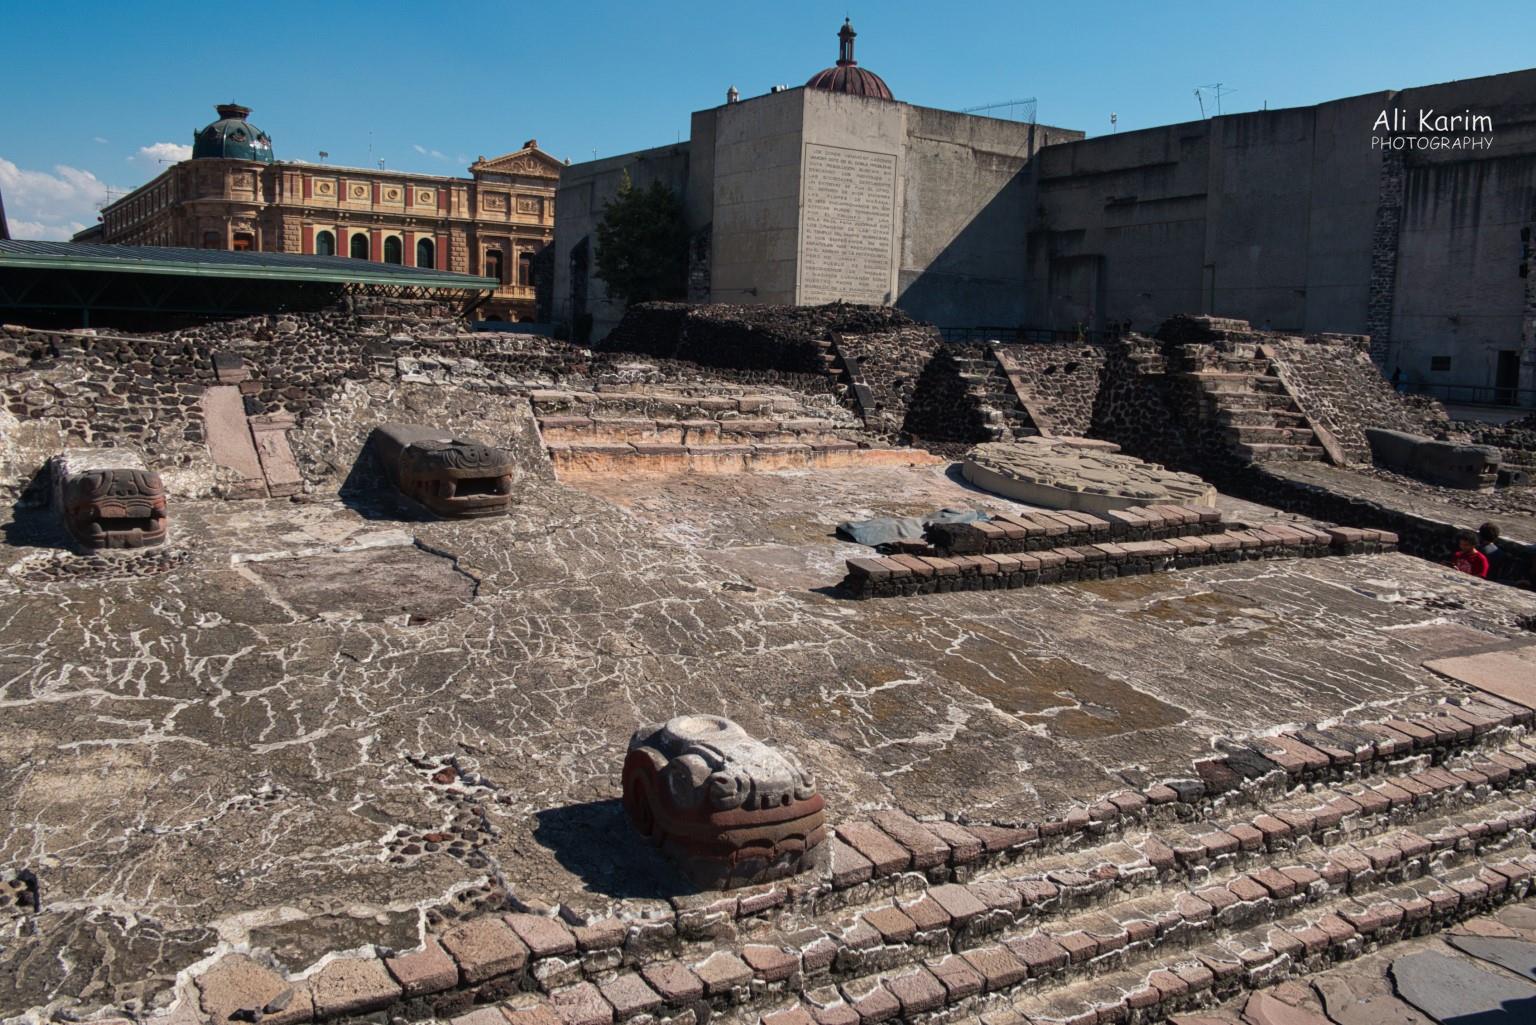 Mexico City, Mexico, Dec 2019, Ancient Mayan temple (The ceremonial center of Aztec Tenochtitlán, known as the Teocalli) excavated right in the Zocalo square outside the Metropolitan Cathedral